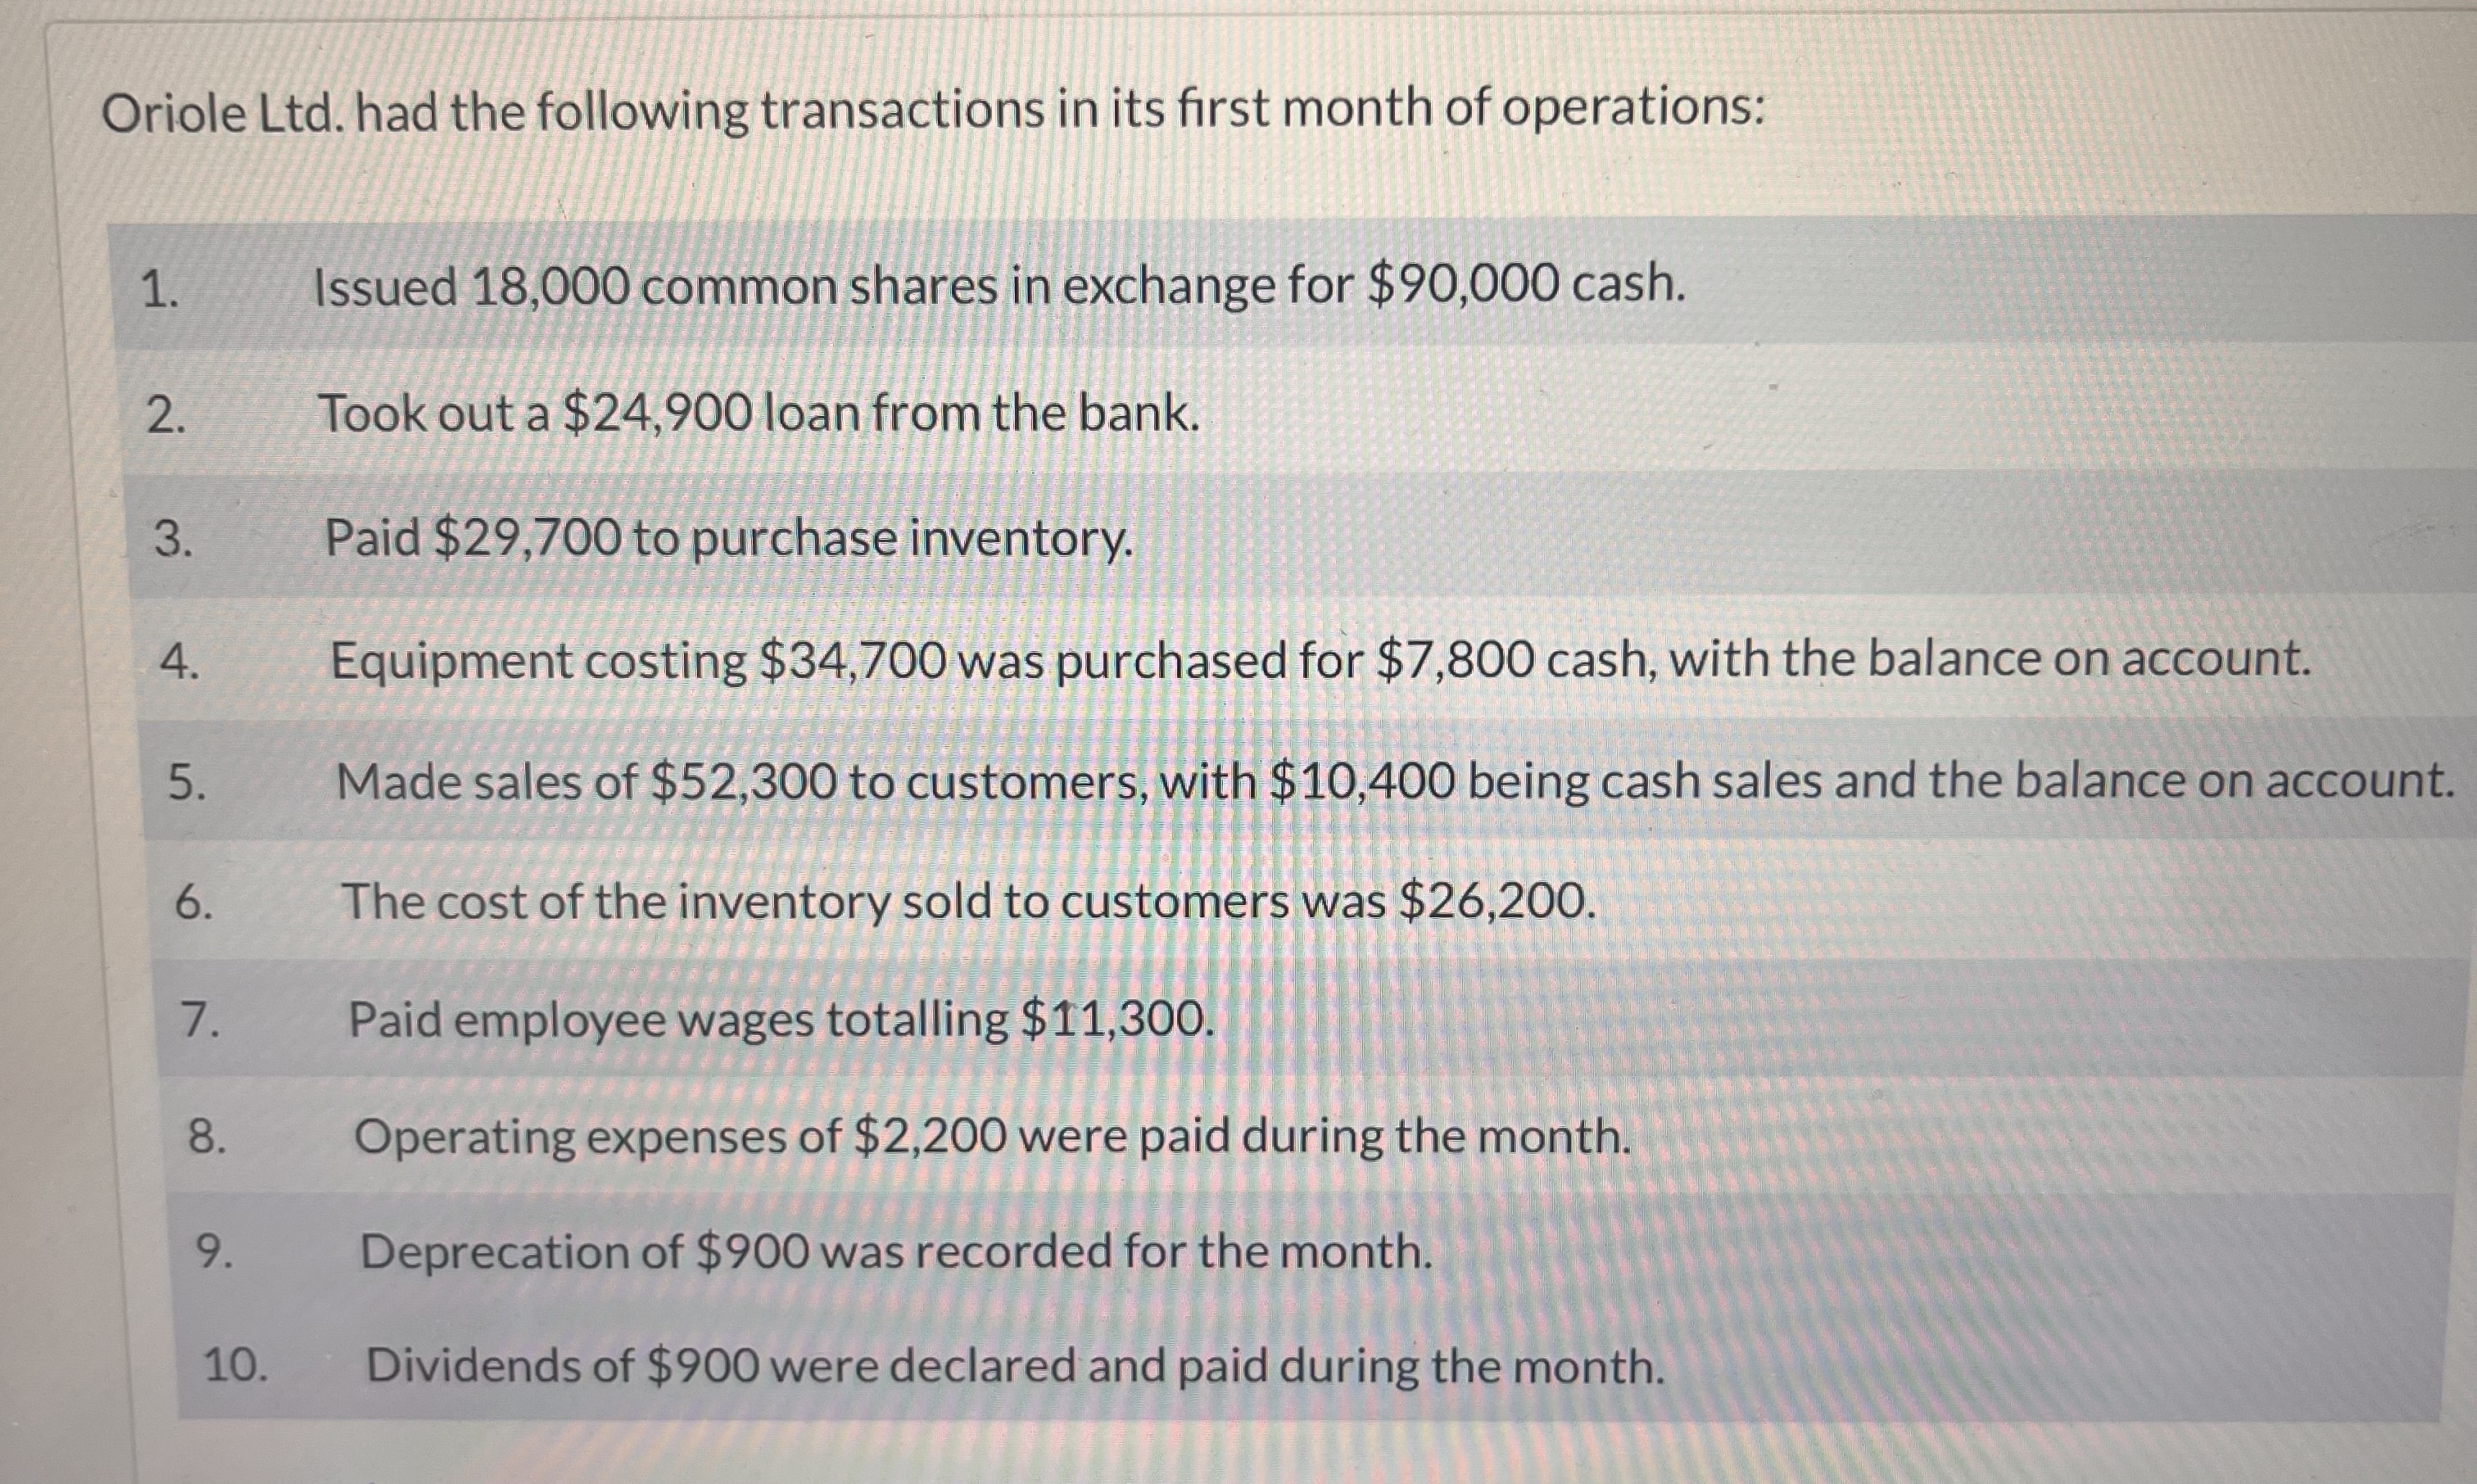 Oriole Ltd. had the following transactions in its first month of operations: 1. 2. 3. 4. 5. 6. 7. 8. 9. 10.